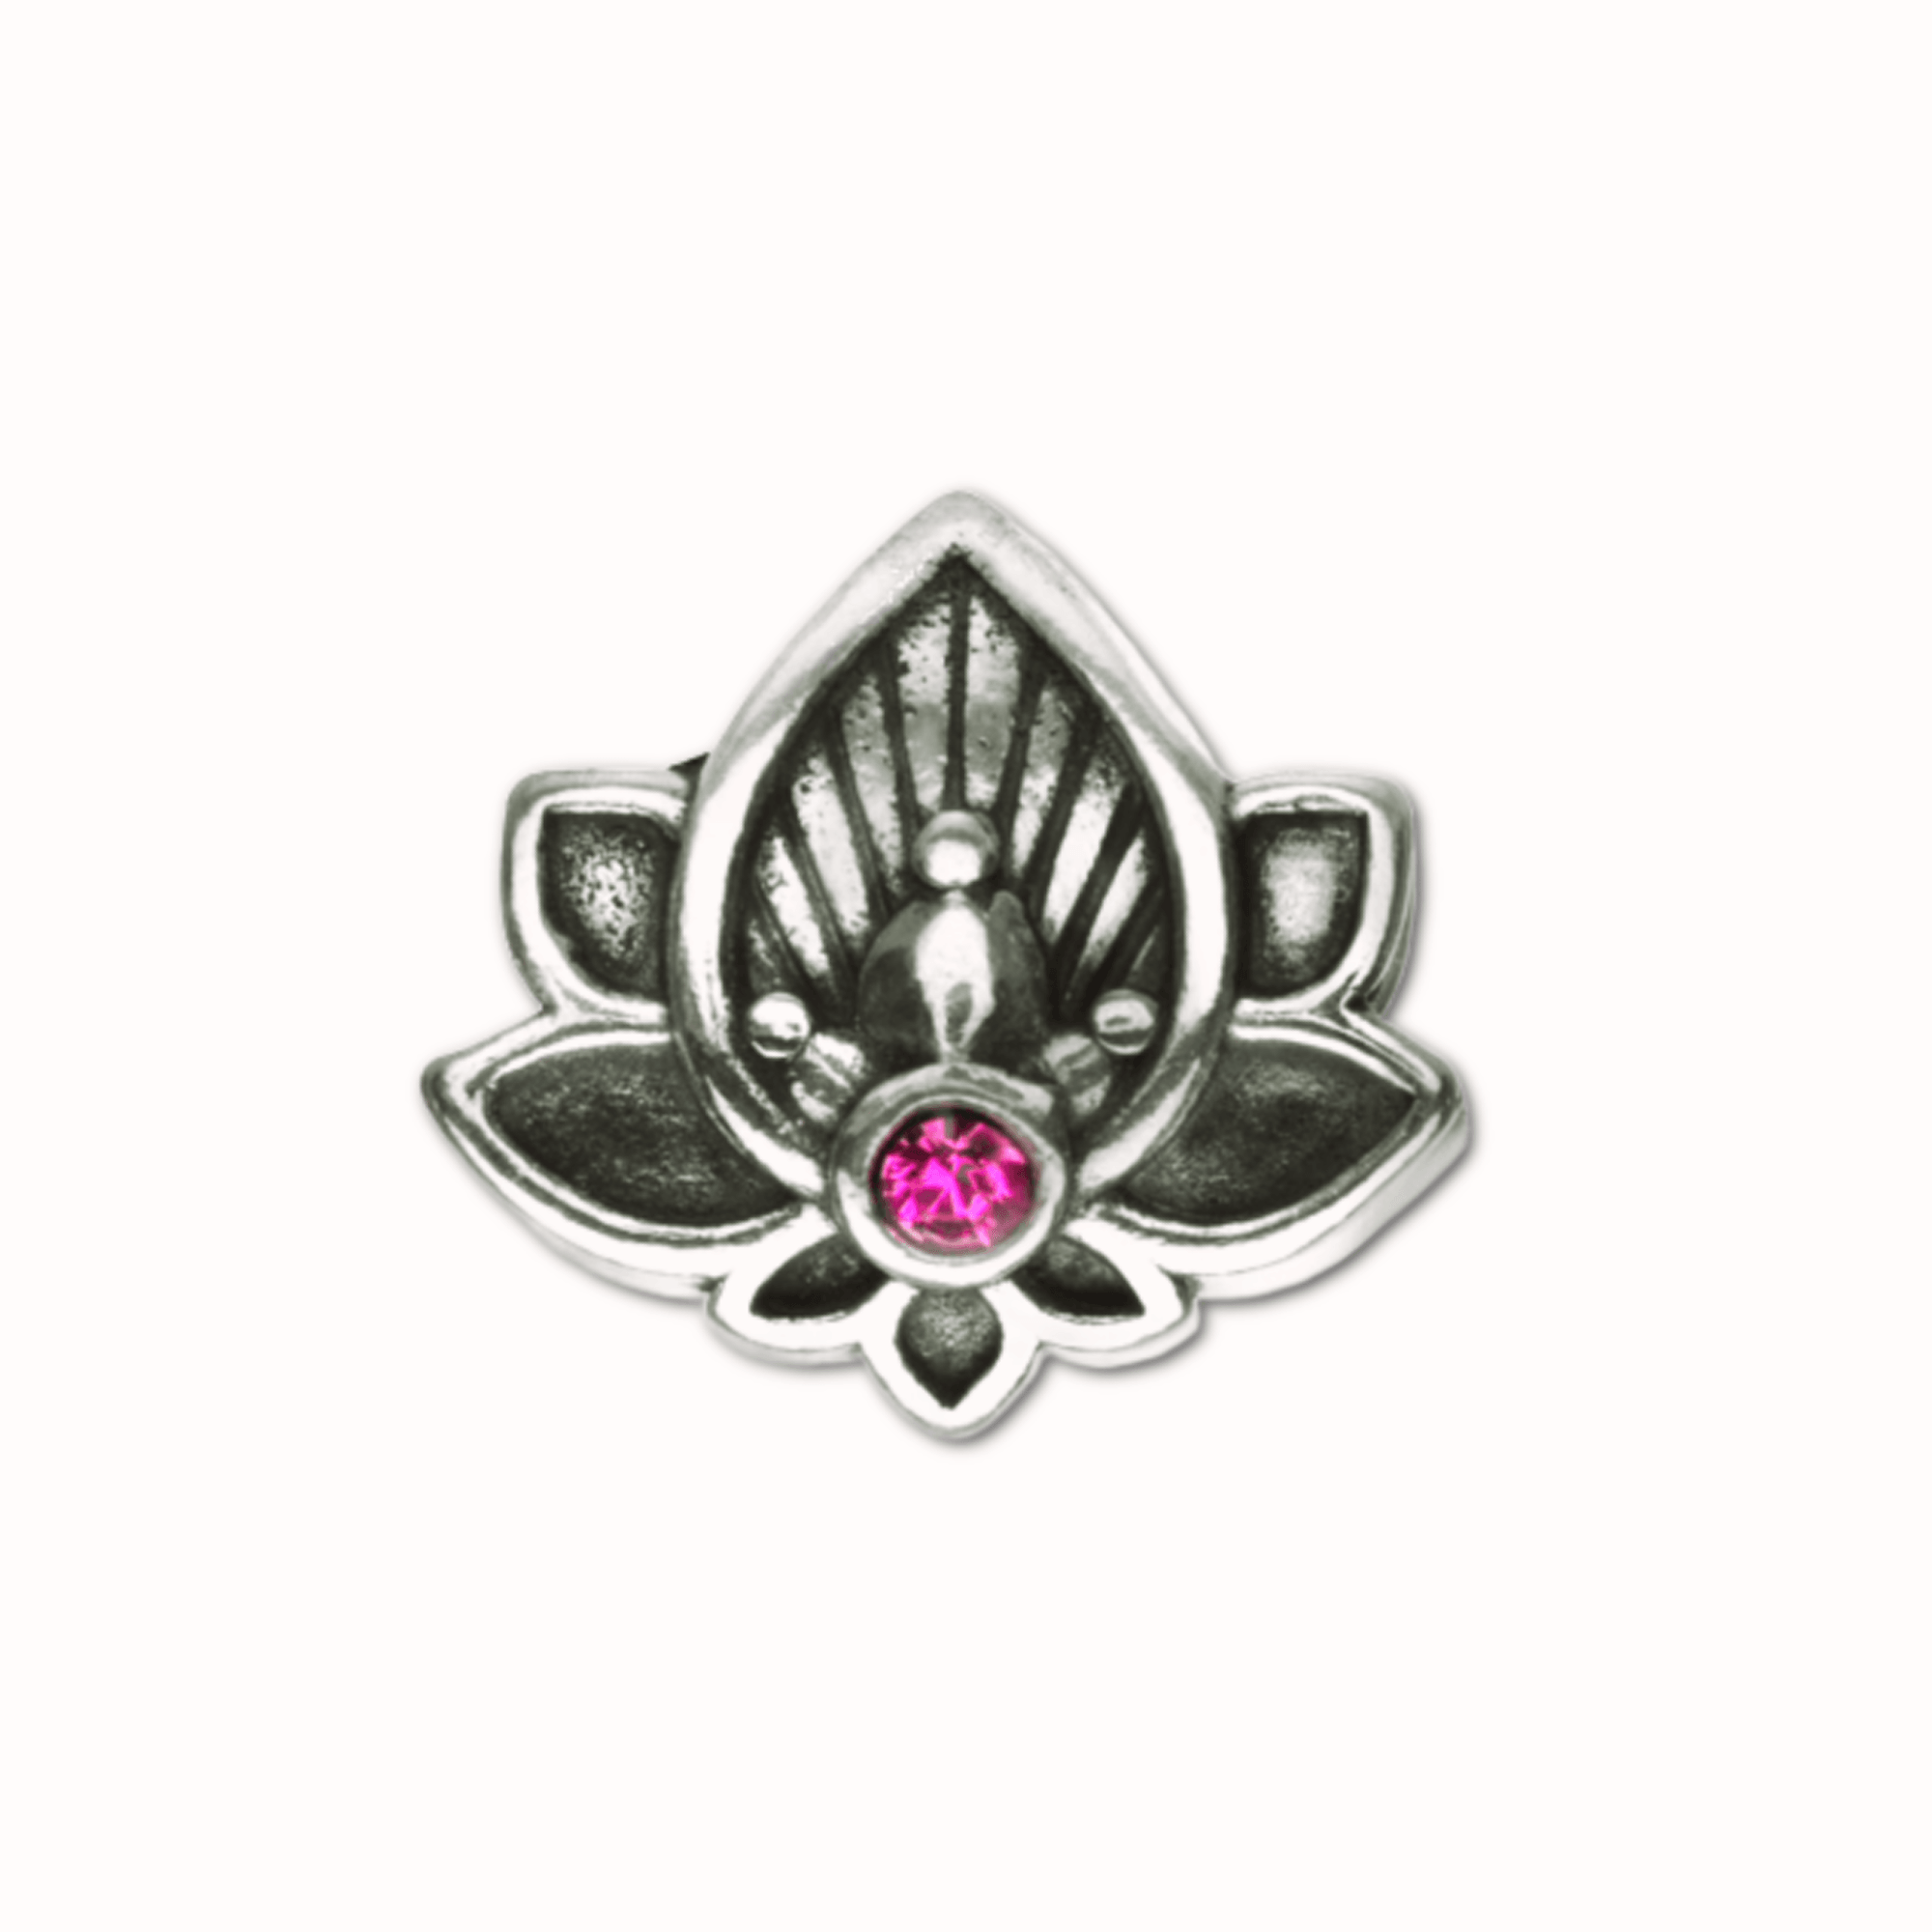 Military Jewelry, Military Charms, Military Gifts, Lotus Flower Charm, Intentional Spacer